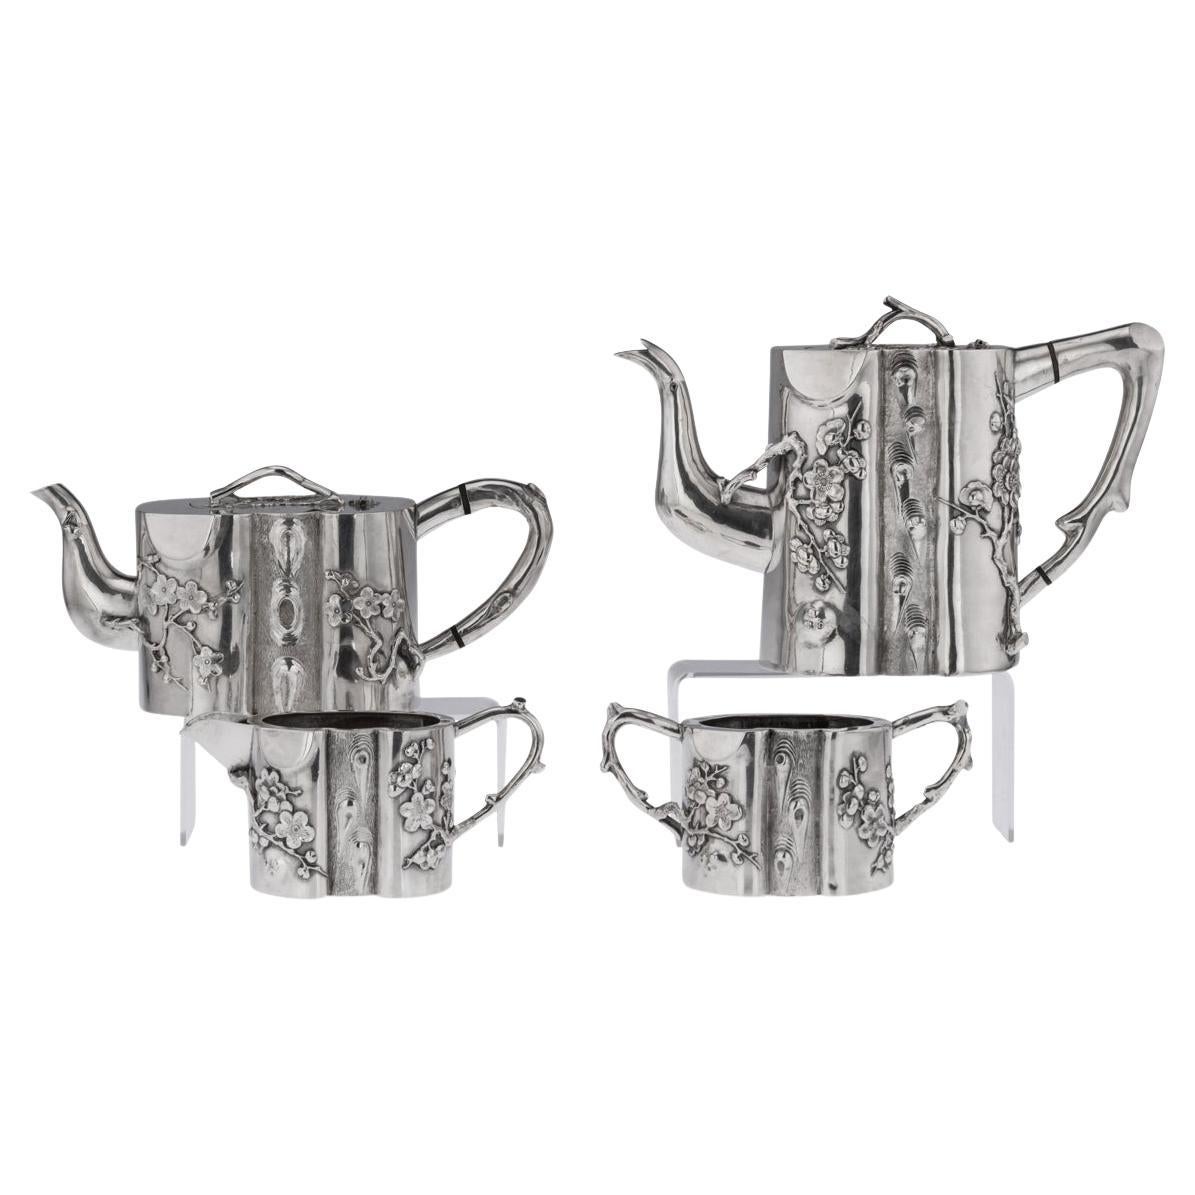 20th Century Chinese Export Solid Silver Four Piece Tea Set, Singfat, c.1900